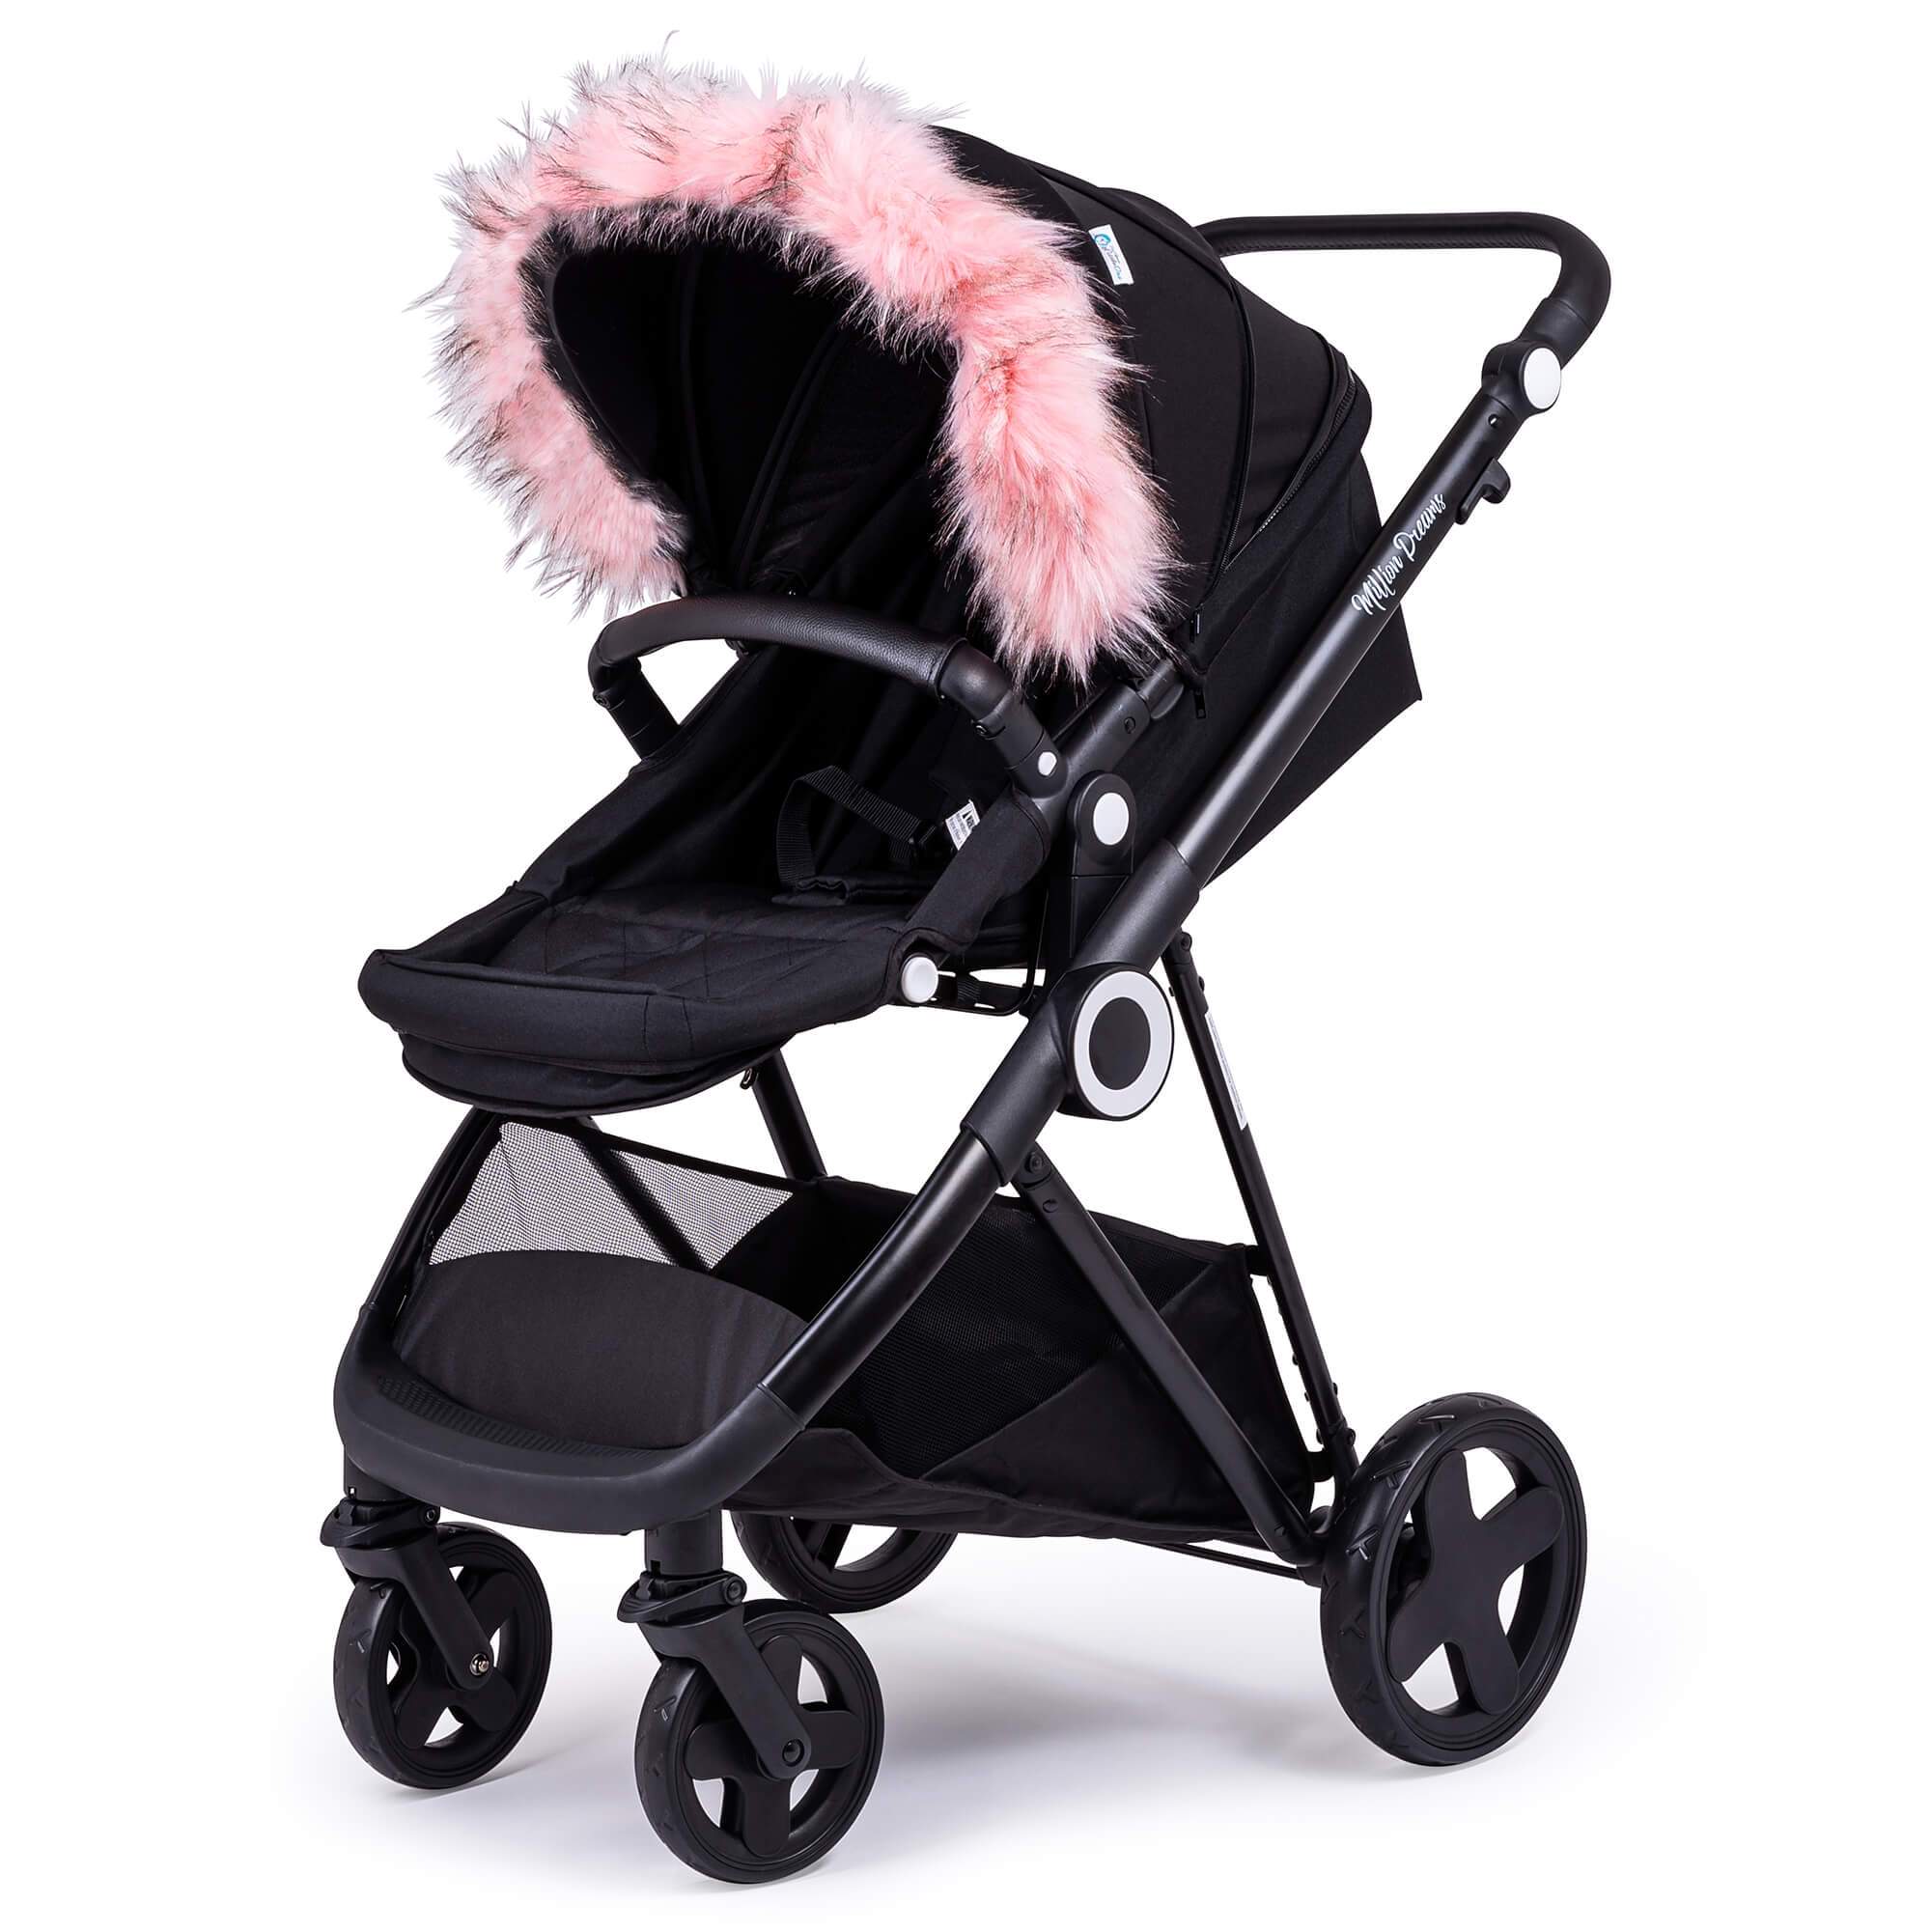 Pram Fur Hood Trim Attachment for Pushchair Compatible with Venicci - Light Pink / Fits All Models | For Your Little One